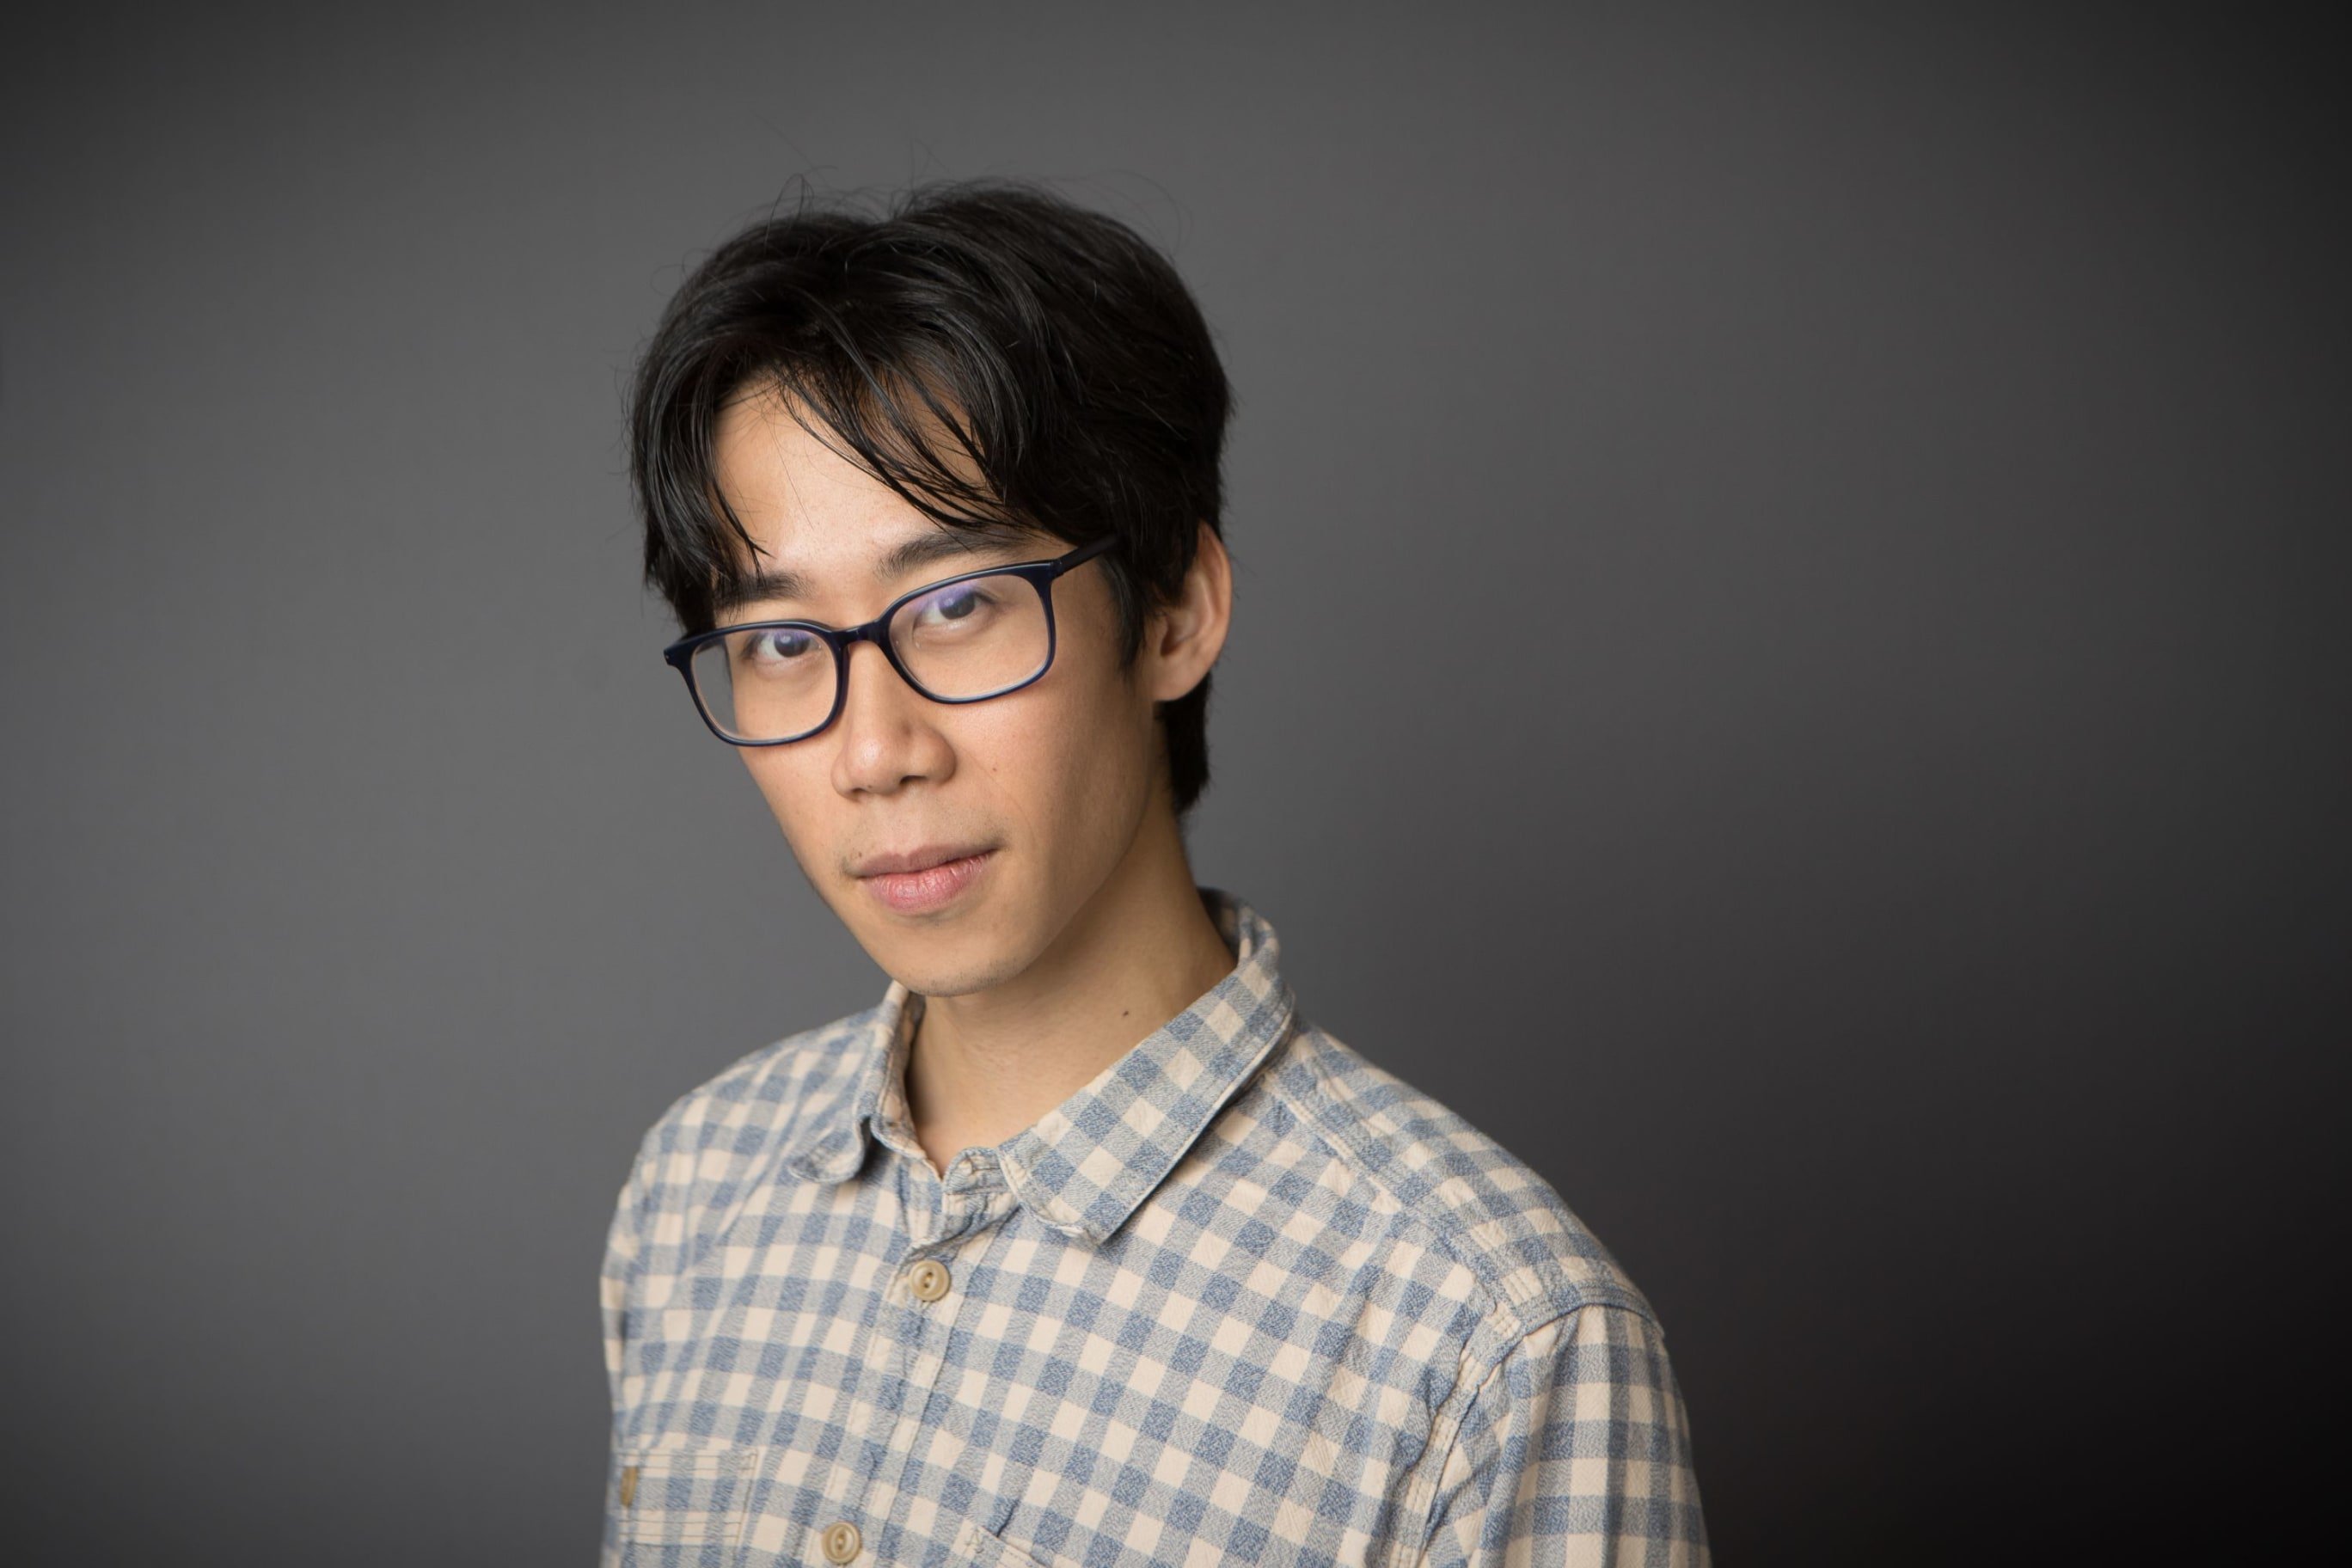 Headshot of Alex, an asian man with glasses and short dark hair with a long fringe